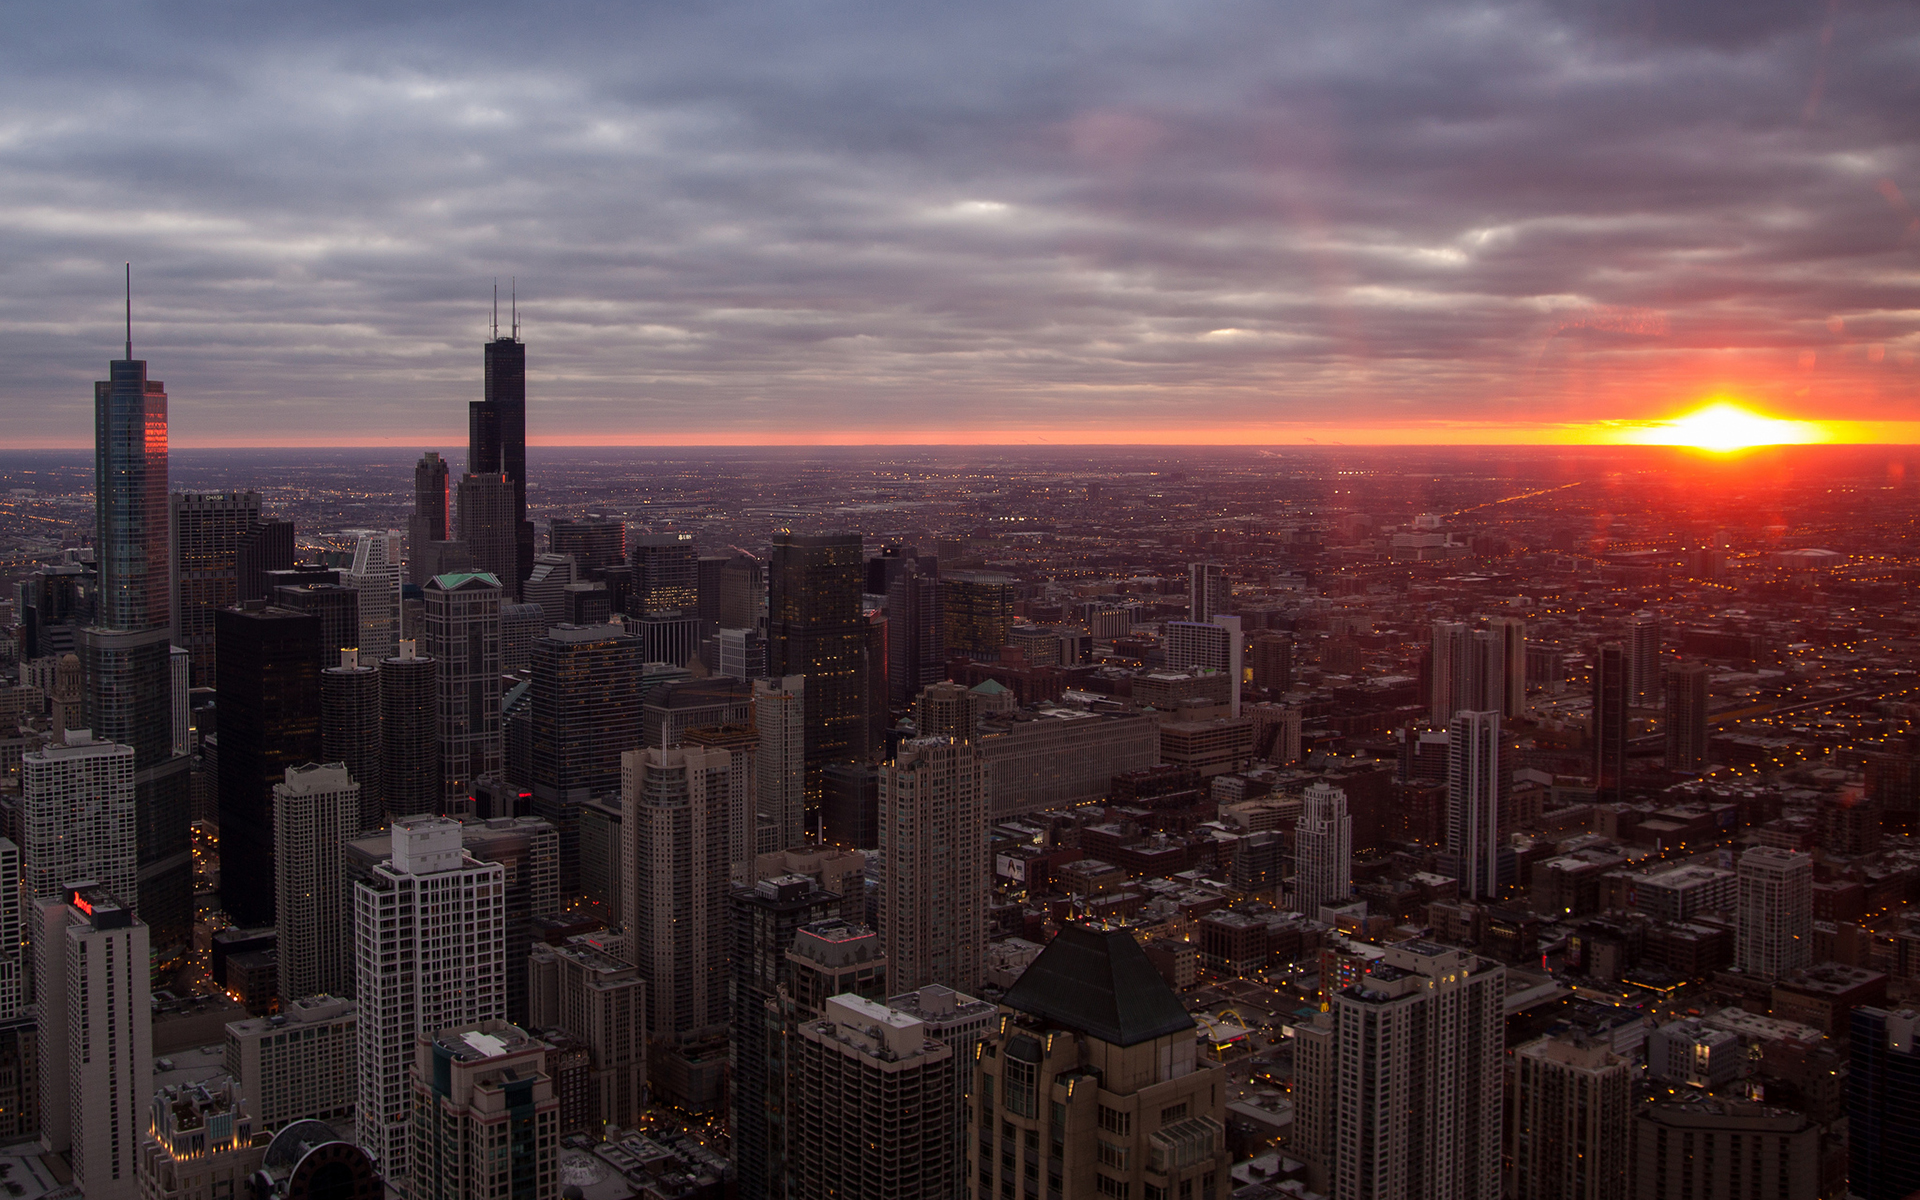 Chicago Buildings Skyscrapers Sunset architecture cities sky clouds sunrise wallpaper background